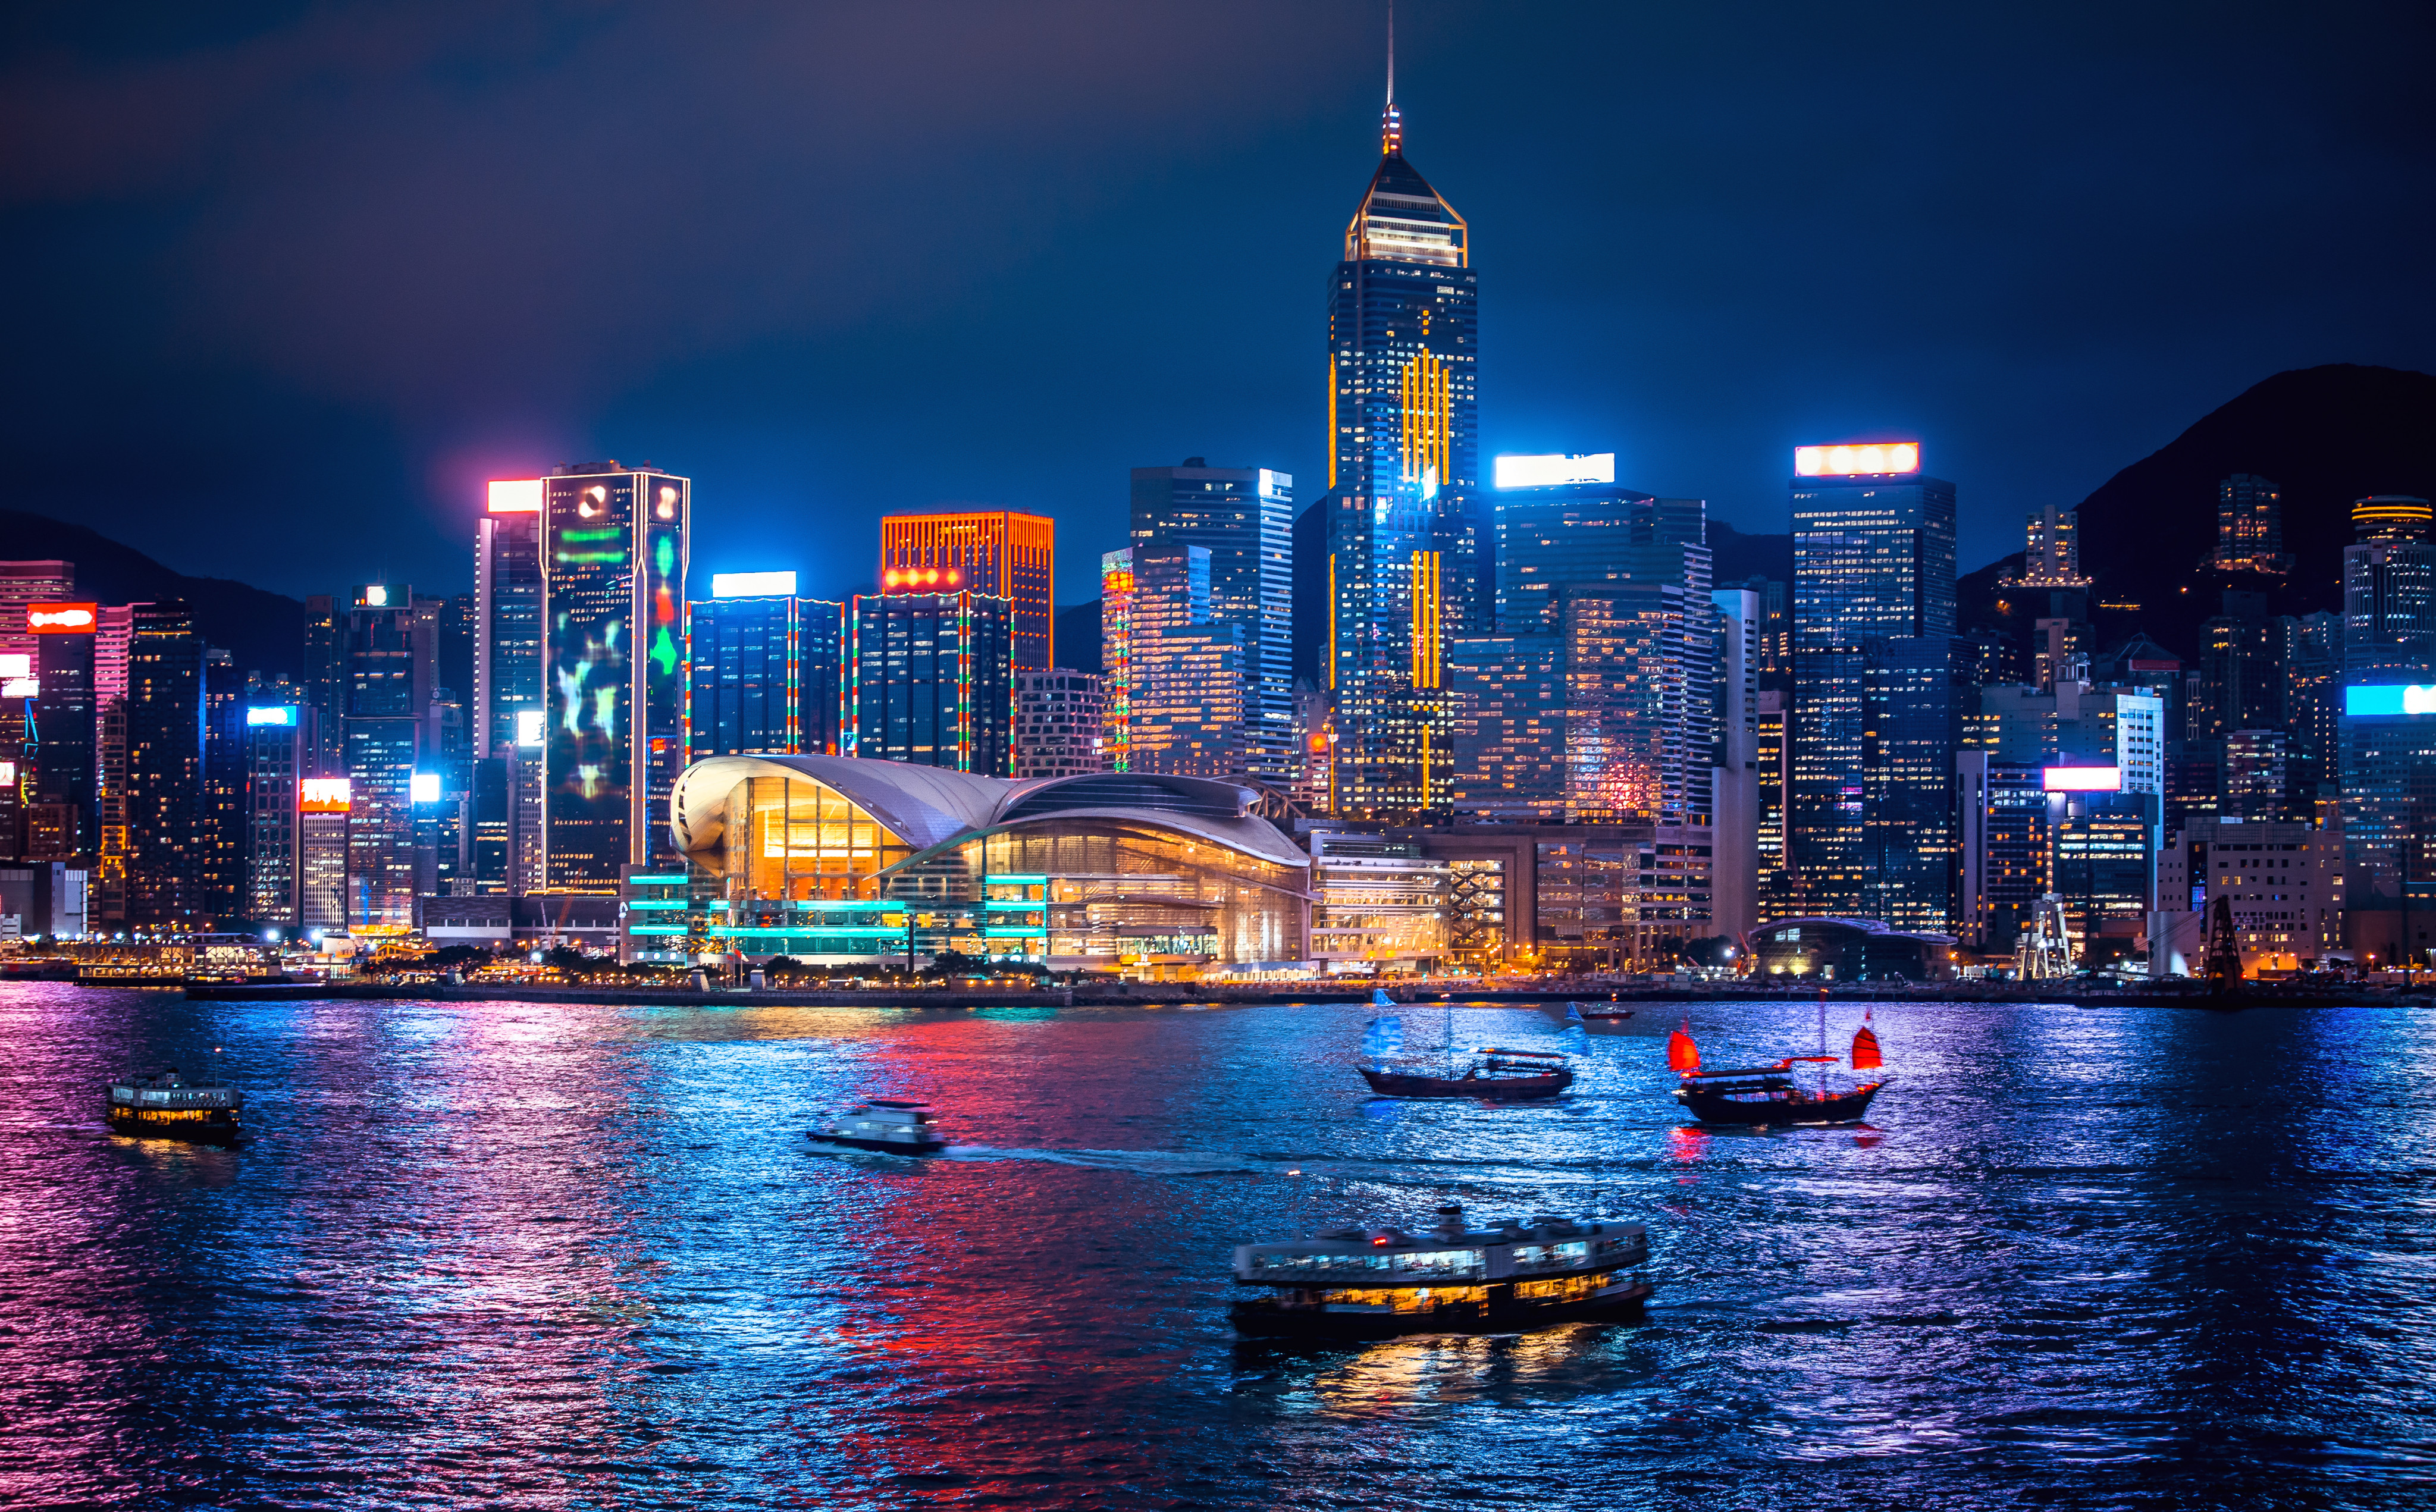 Beijing is promoting Hong Kong as a fundraising hub for mainland Chinese companies and as a superconnector between China and the world. Photo: Shutterstock